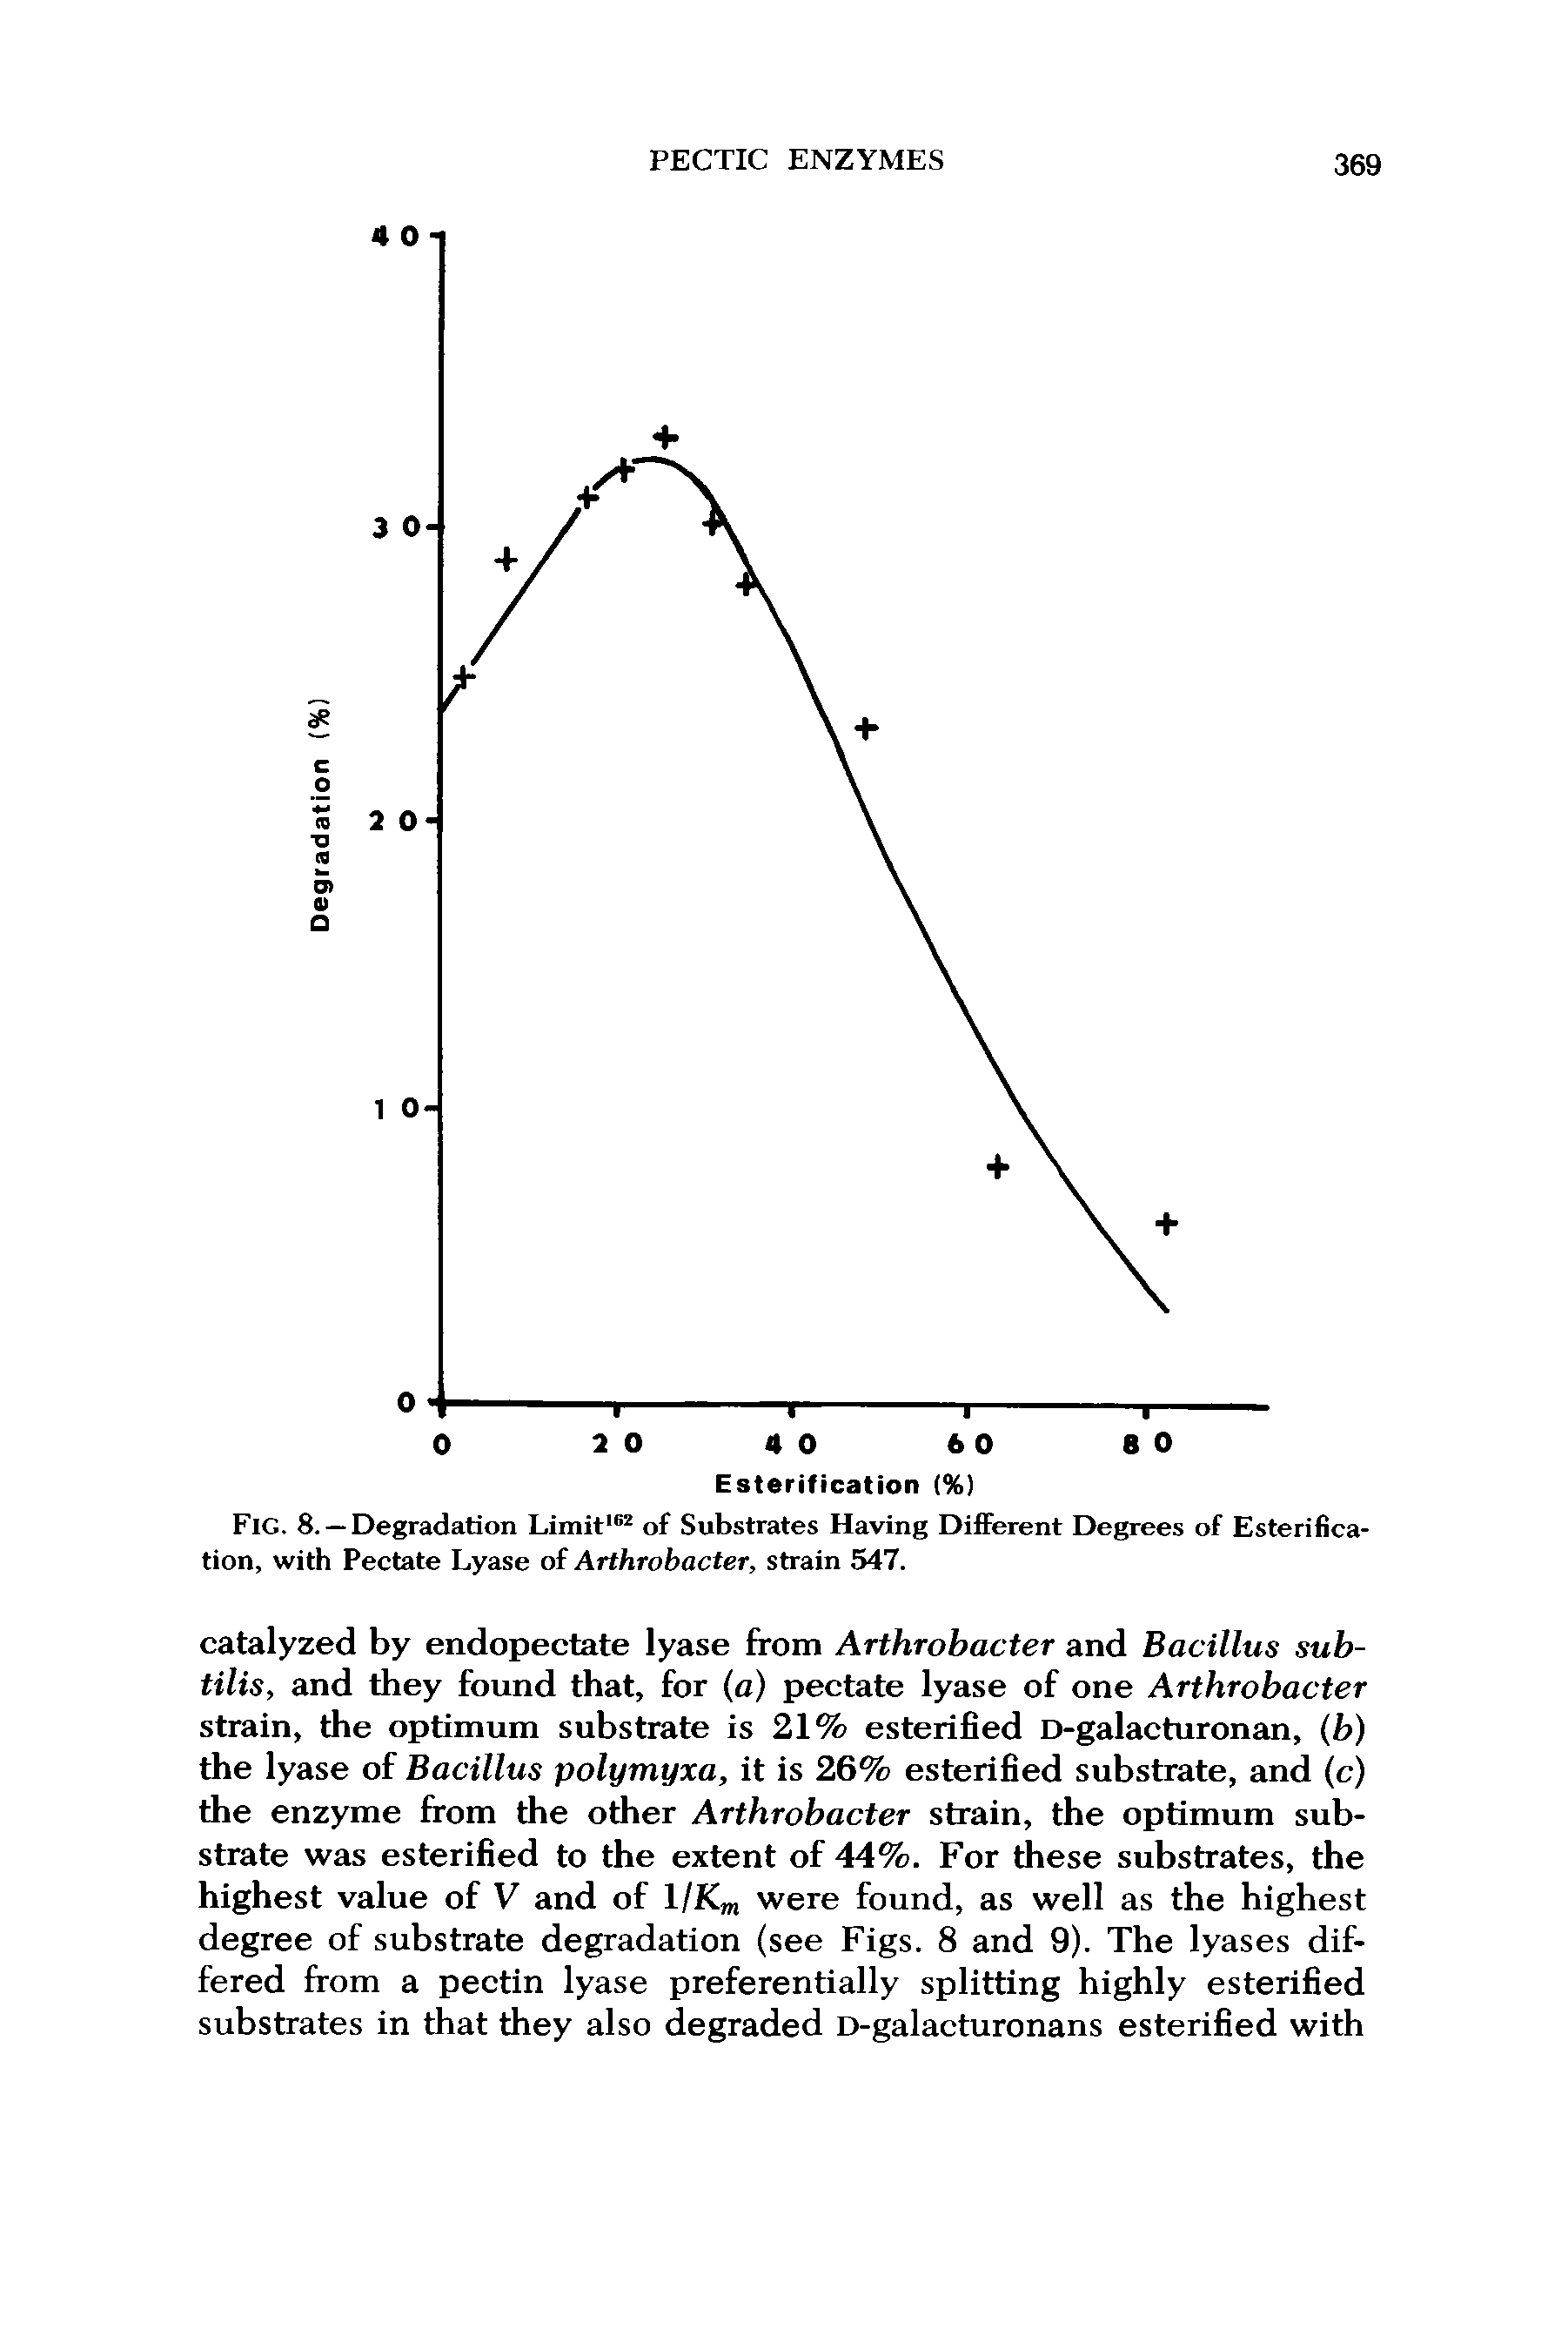 Fig. 8. — Degradation Limit162 of Substrates Having Different Degrees of Esterification, with Pectate Lyase of Arthrobacter, strain 547.